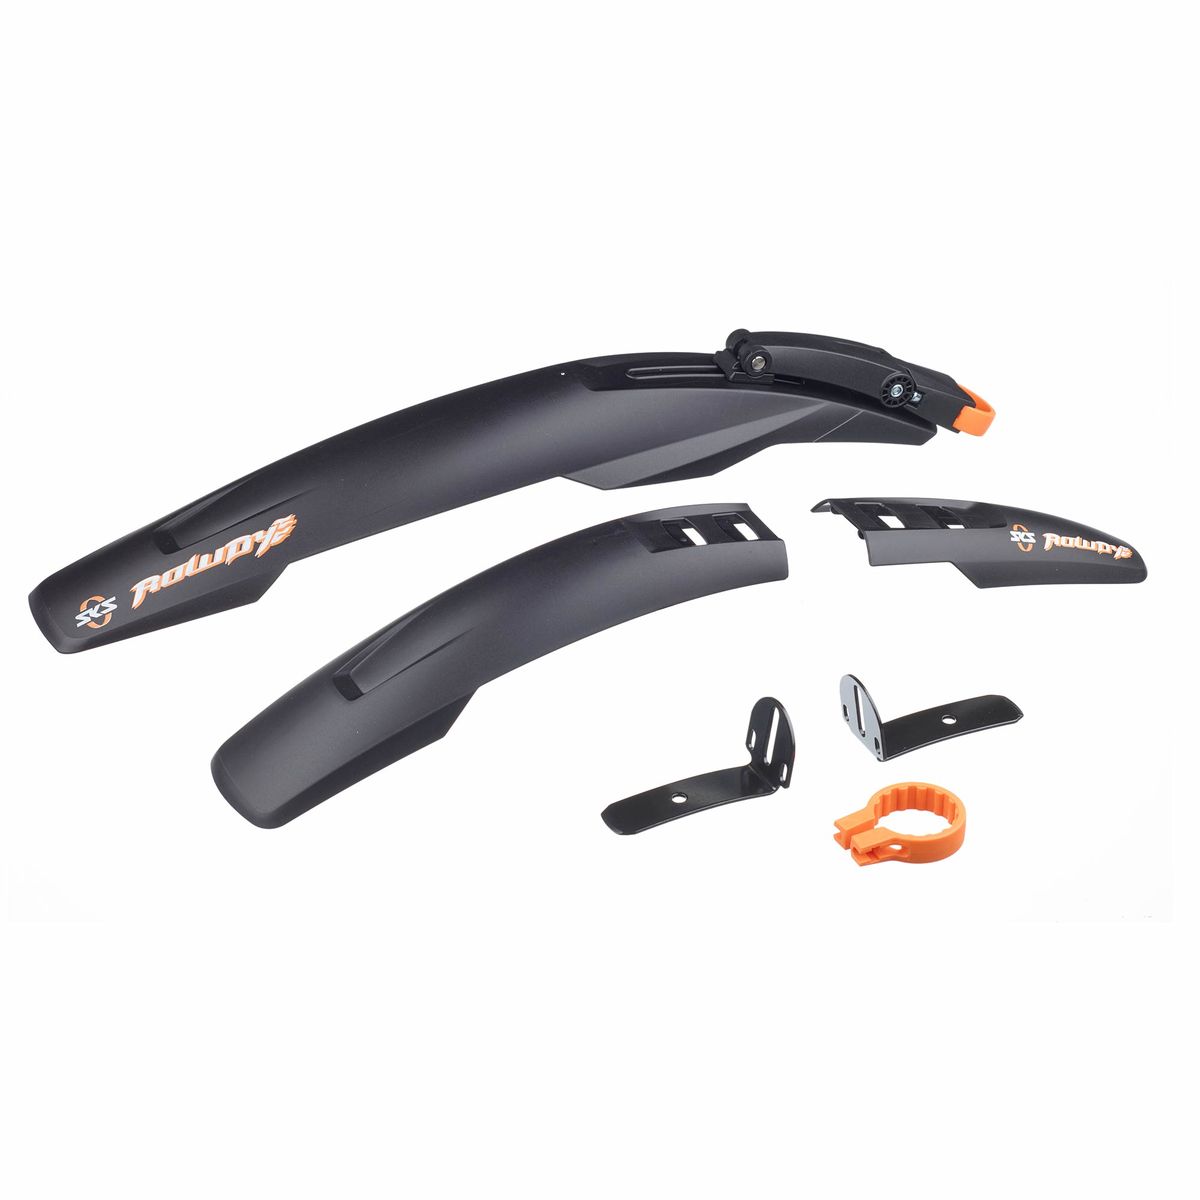 sks rowdy mudguard set - Online Discount Shop for Electronics, Apparel,  Toys, Books, Games, Computers, Shoes, Jewelry, Watches, Baby Products,  Sports & Outdoors, Office Products, Bed & Bath, Furniture, Tools, Hardware,  Automotive